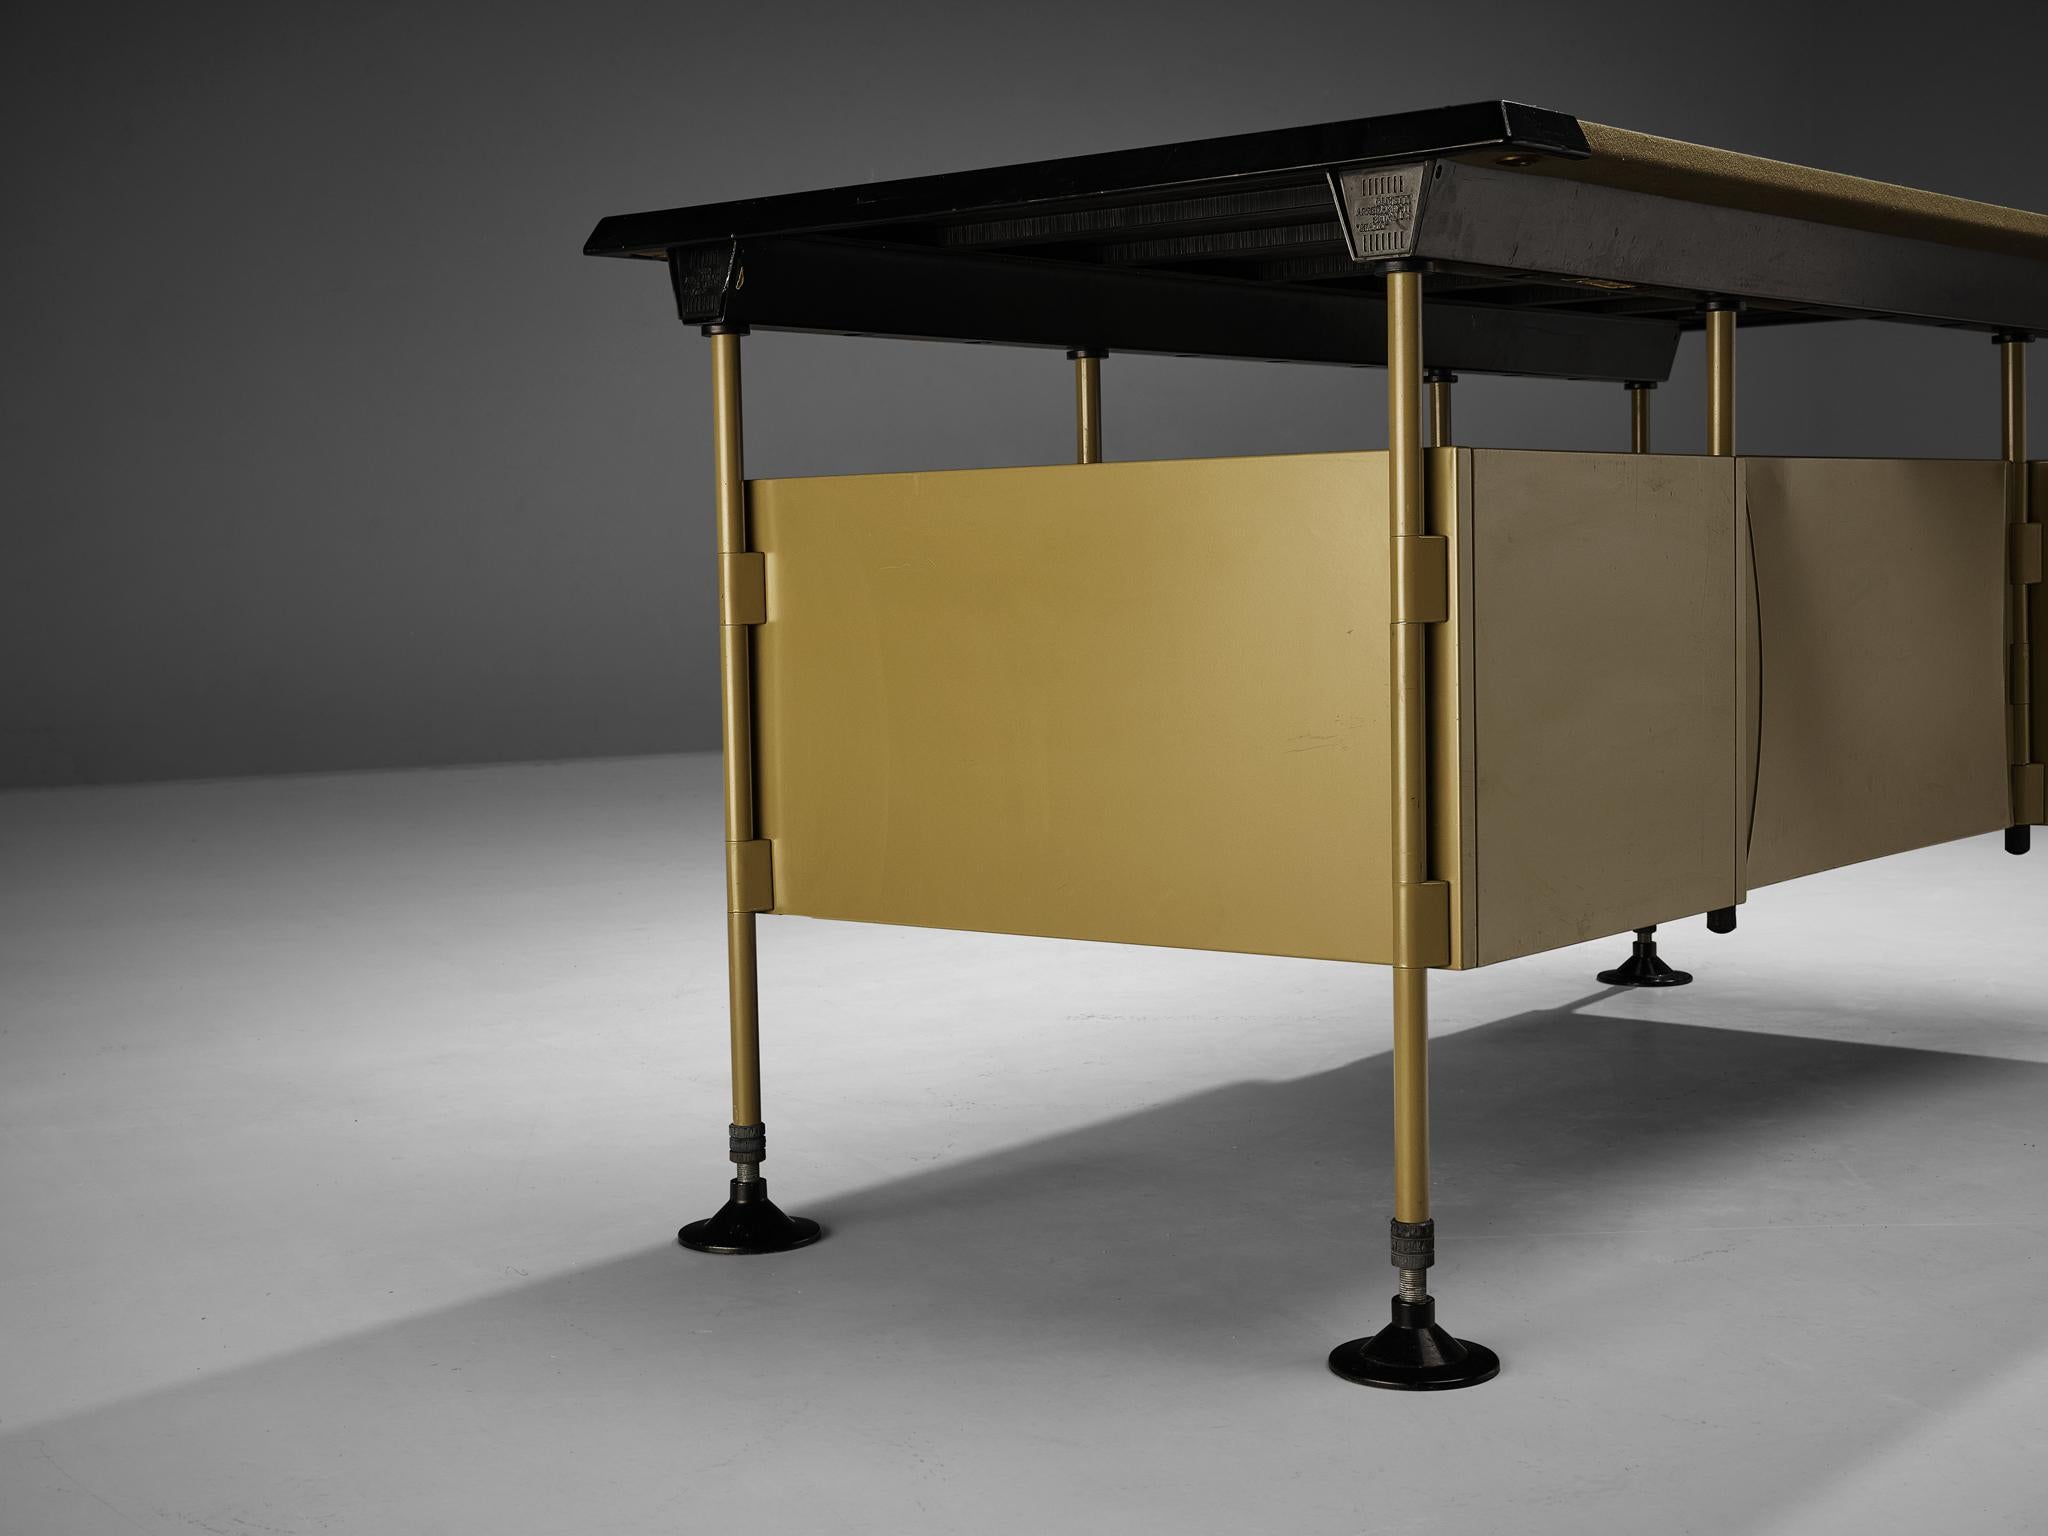 Steel Studio BBPR for Olivetti 'Spazio' Set with Desk, Sideboard and Table 